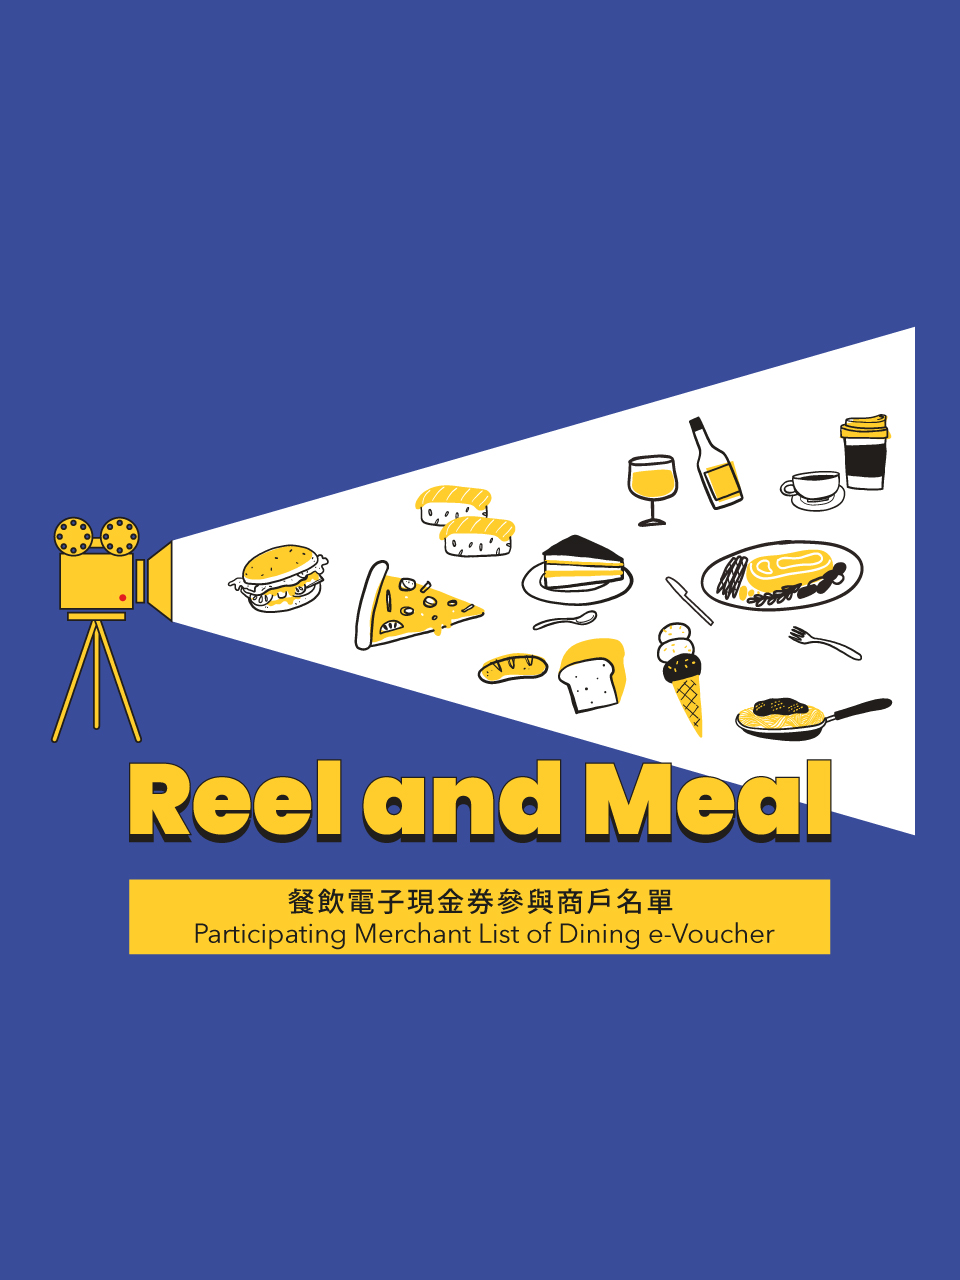 Reel and Meal Participating Merchant List of Dining e-Voucher